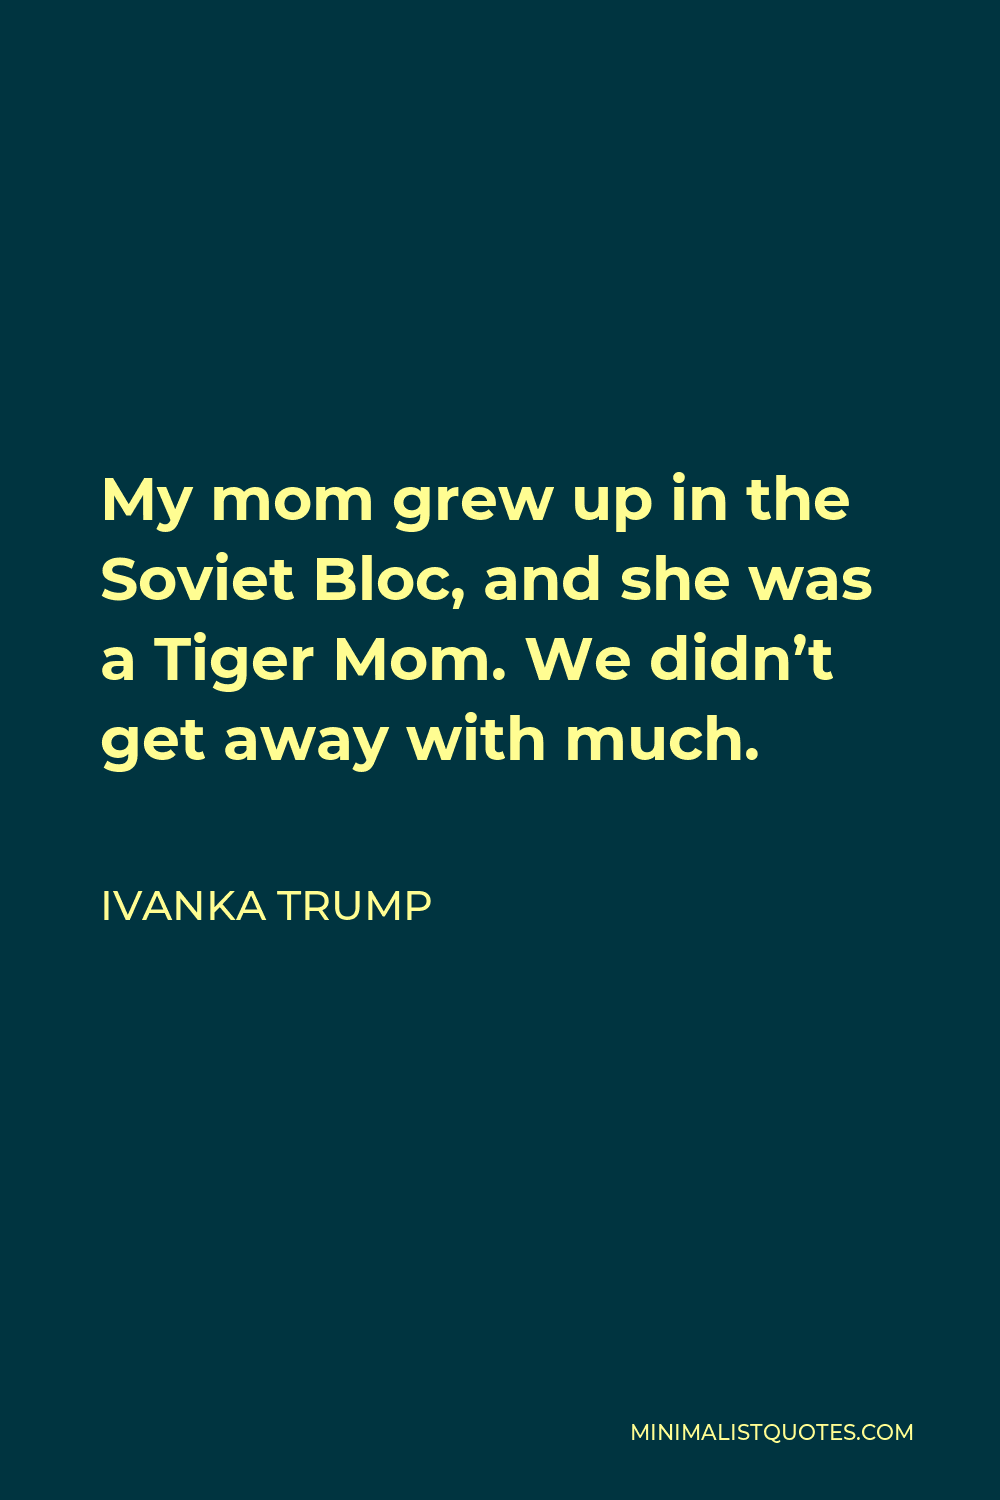 Ivanka Trump Quote - My mom grew up in the Soviet Bloc, and she was a Tiger Mom. We didn’t get away with much.